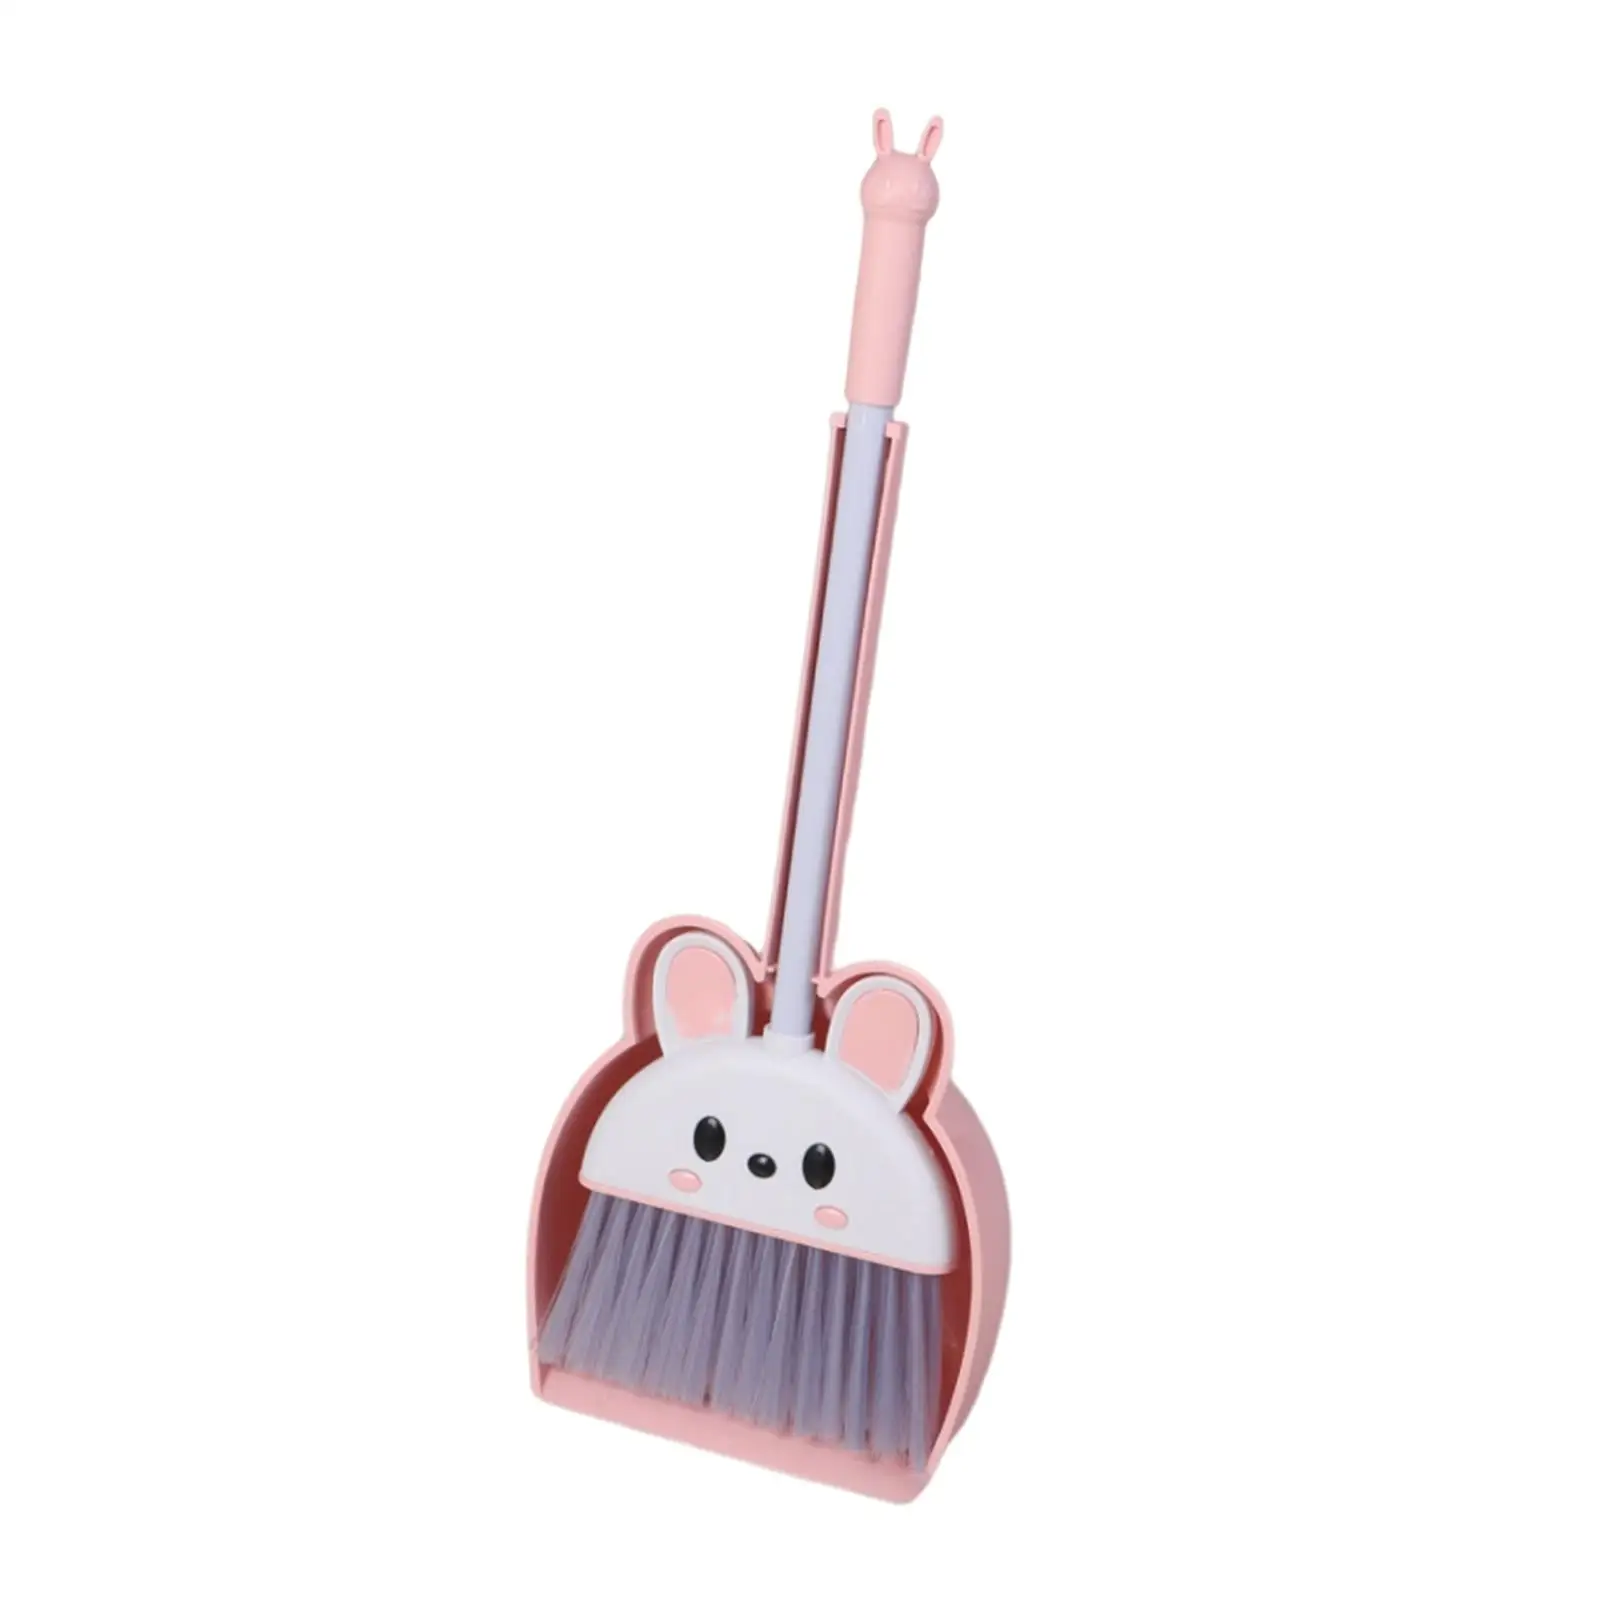 Mini Broom with Dustpan for Kids, Housekeeping Pretend Play Cleaning Tools,Play House Toy Cleaning Set for Preschool